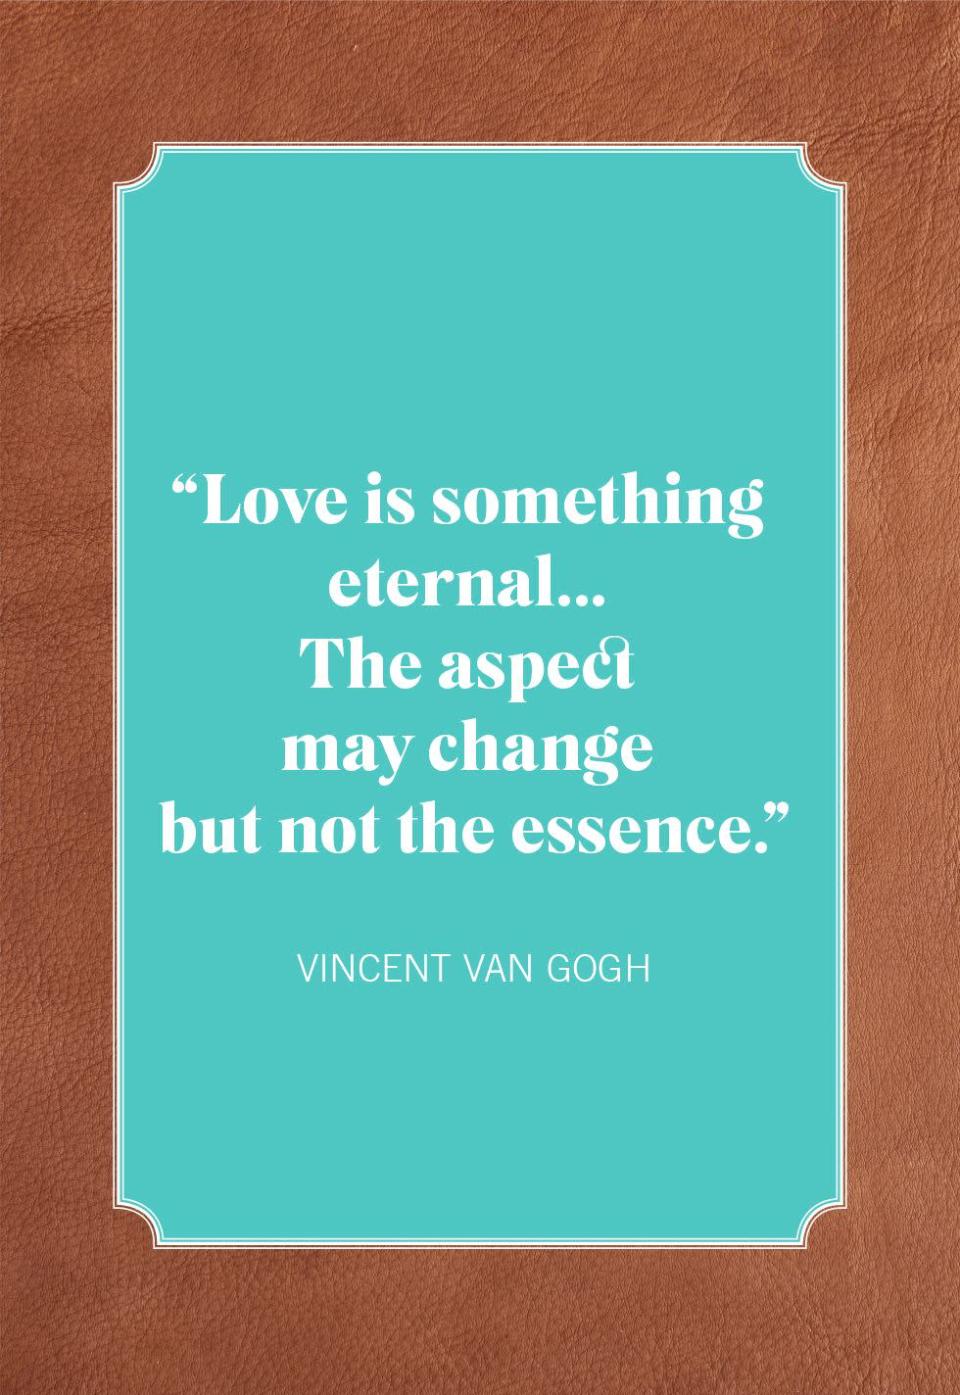 <p>"Love is something eternal... The aspect may change but not the essence."</p>